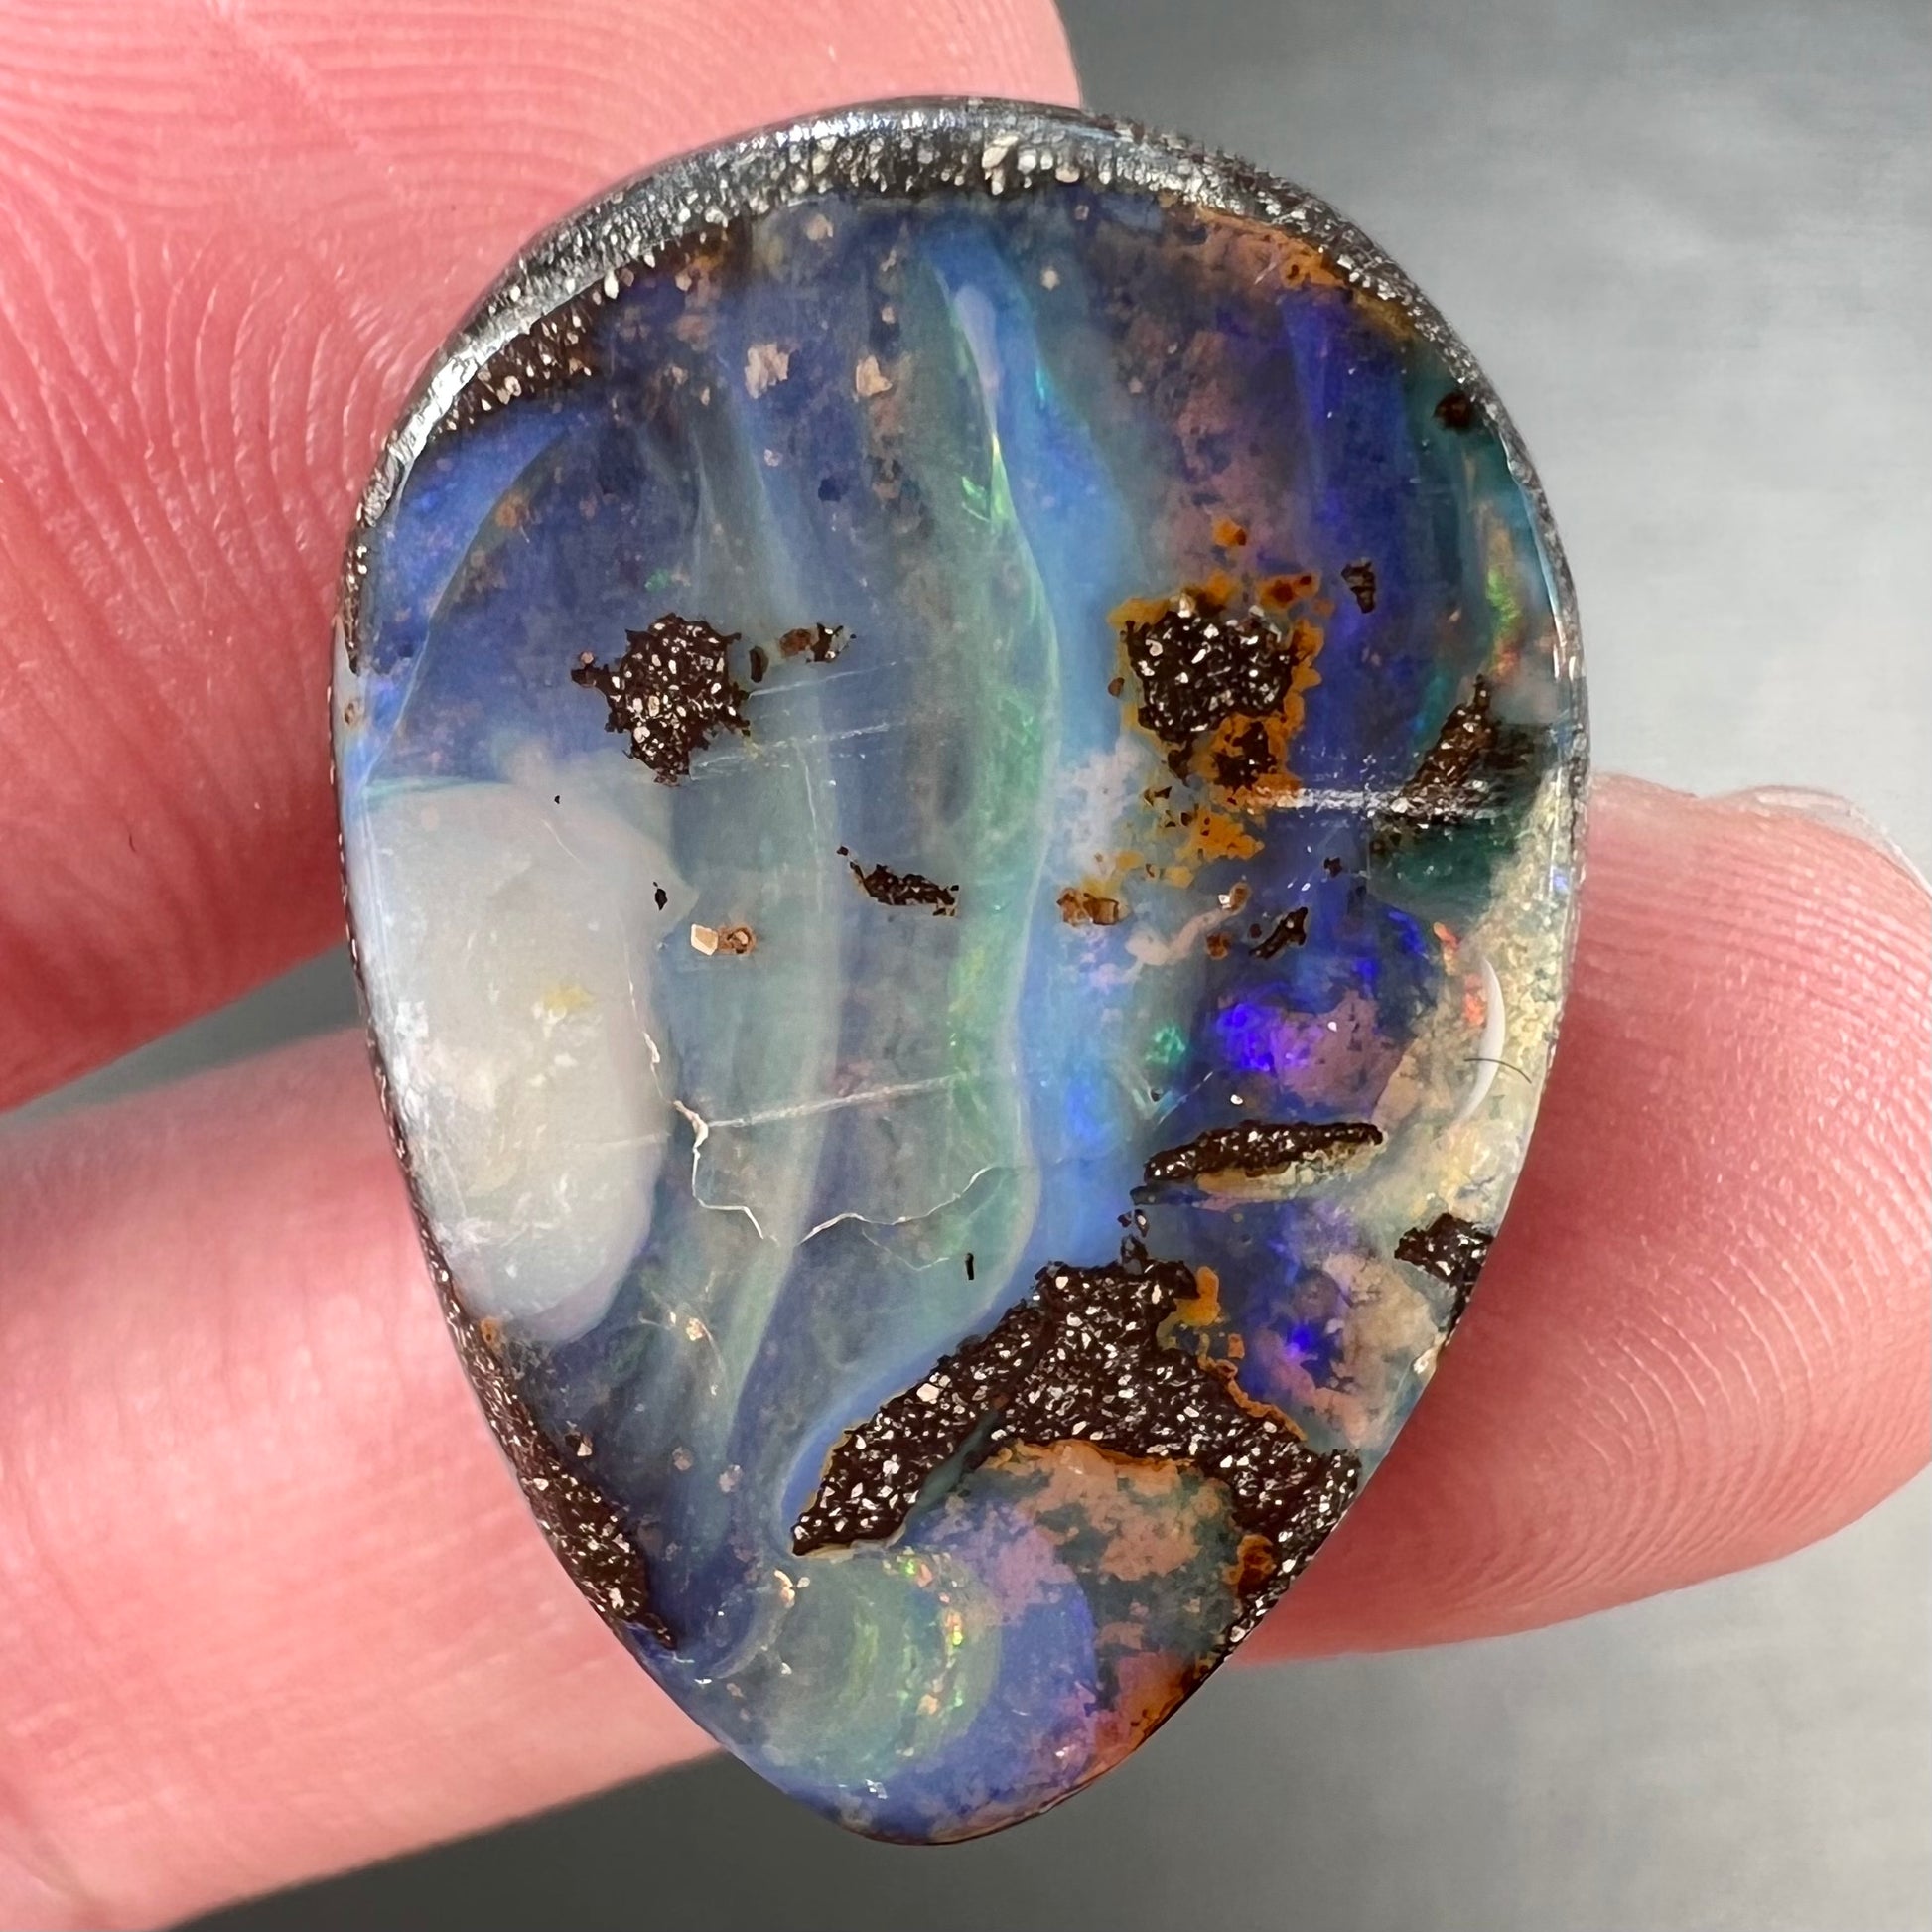 A loose, pear shaped Australian boulder opal.  The pattern on the opal resembles the face of a very sad man.